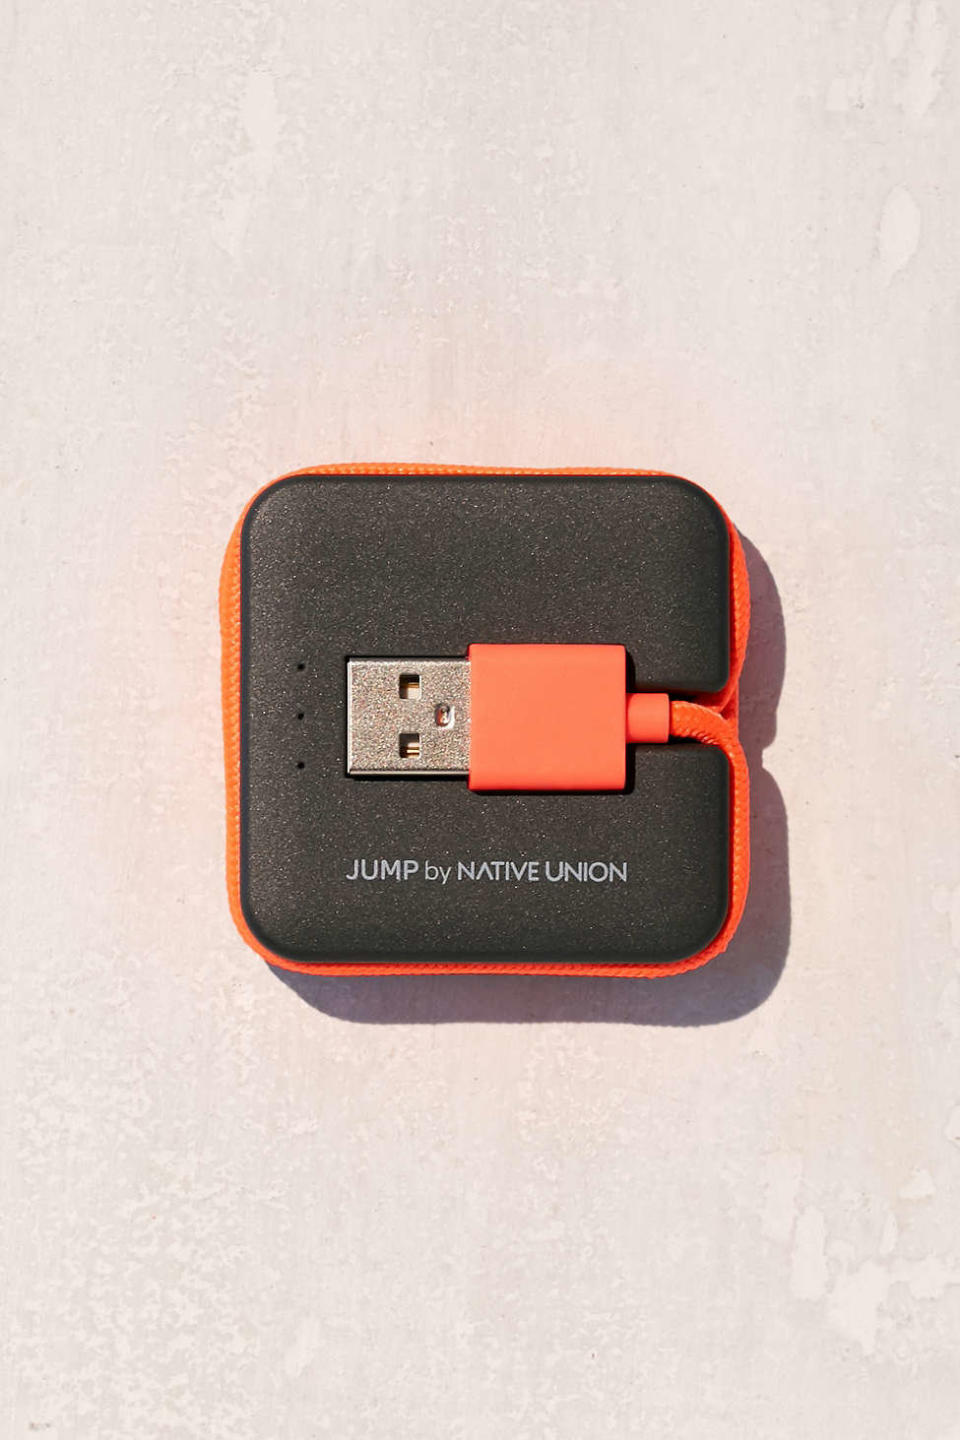 Native Union 2-In-1 Charging JUMP&nbsp;Cable, $50, <a href="http://www.urbanoutfitters.com/urban/catalog/productdetail.jsp?id=39685284&amp;category=A-TECH-PHONE" target="_blank">Urban Outfitters</a>